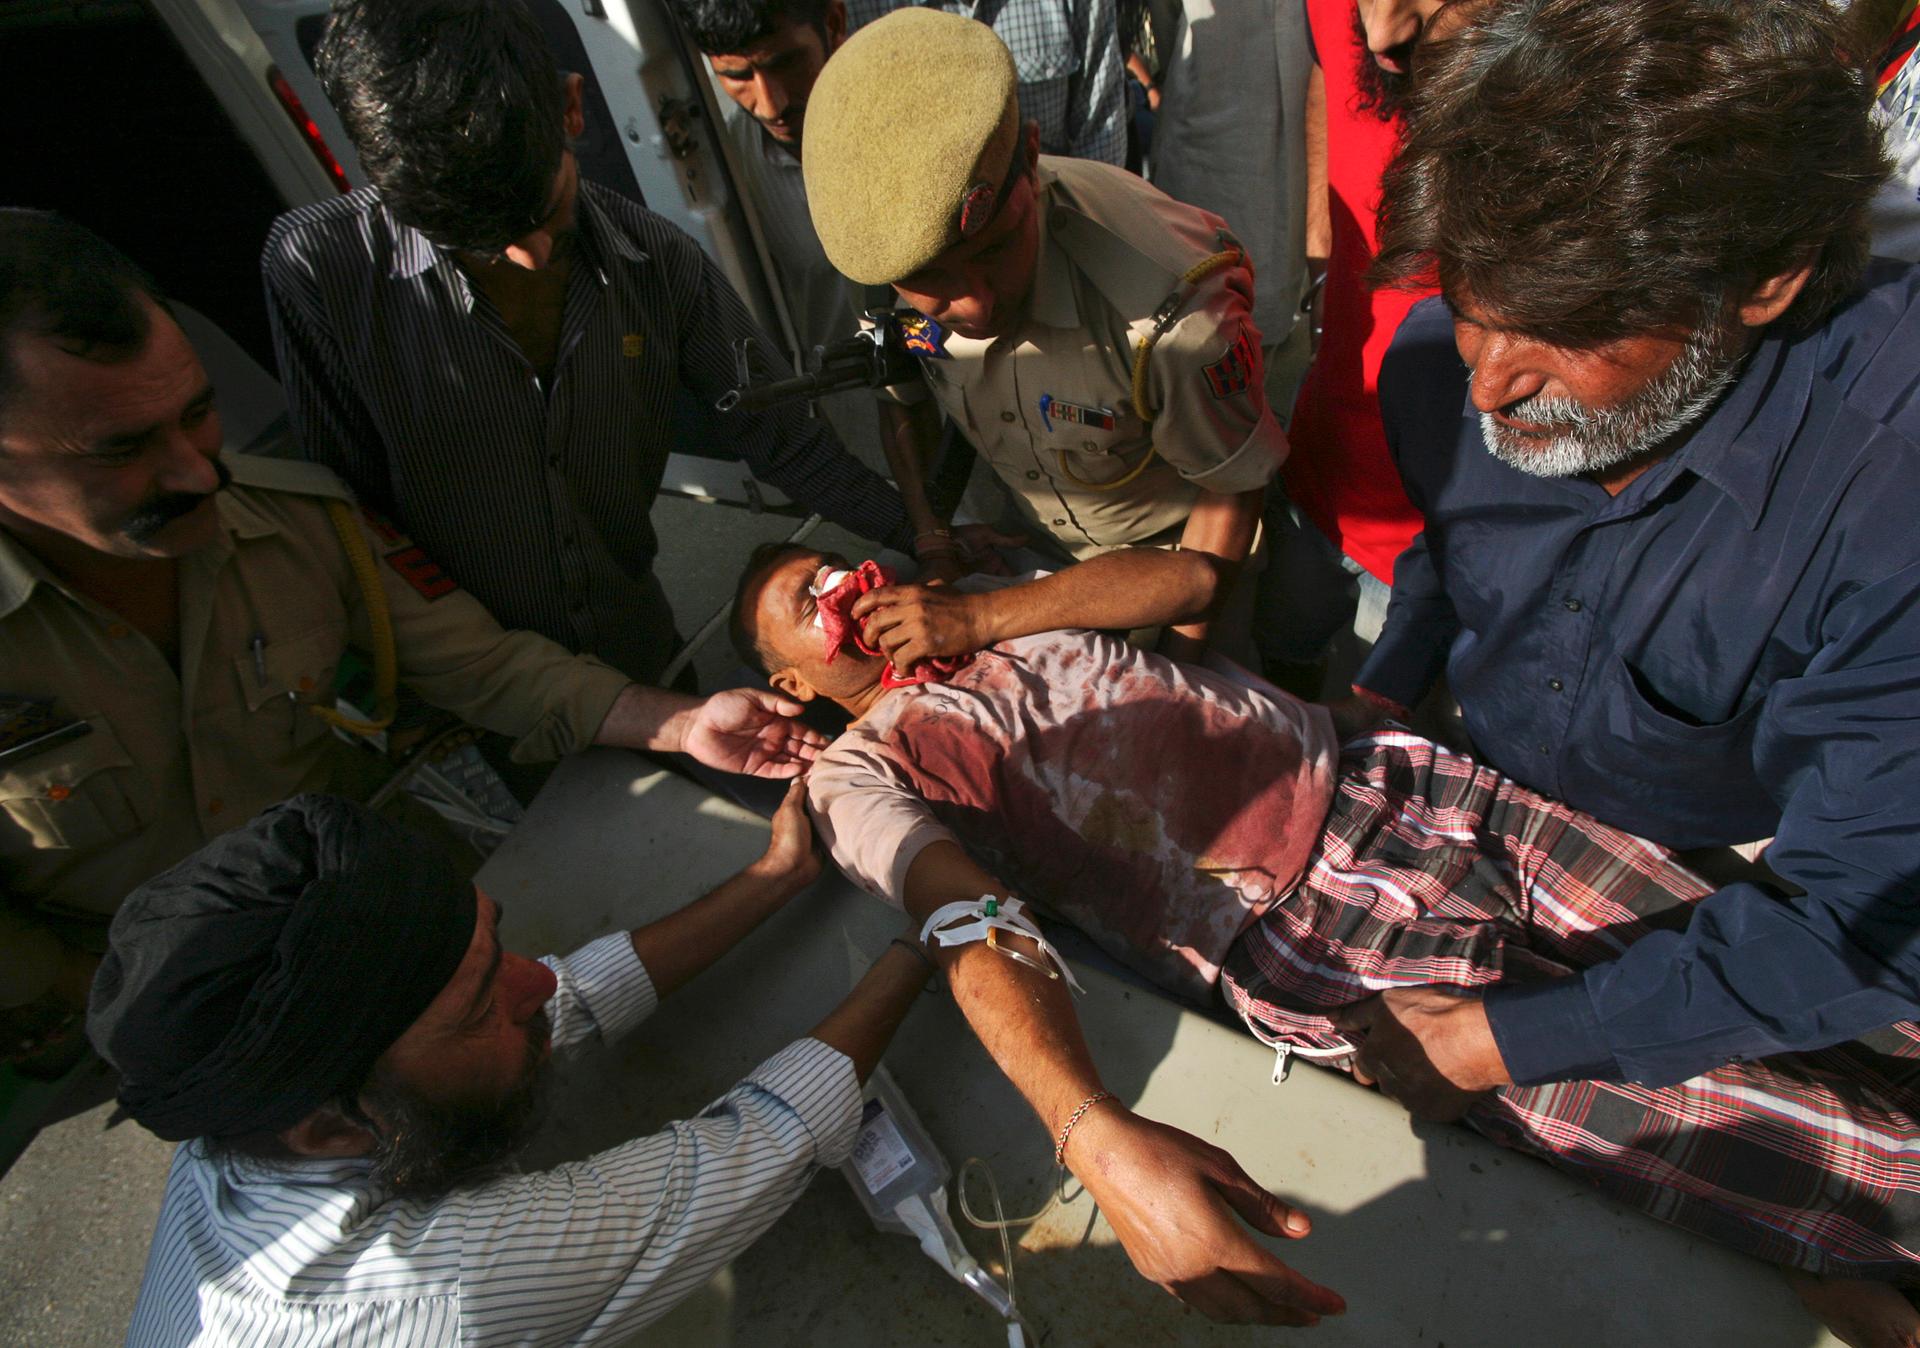 Wounded man in India